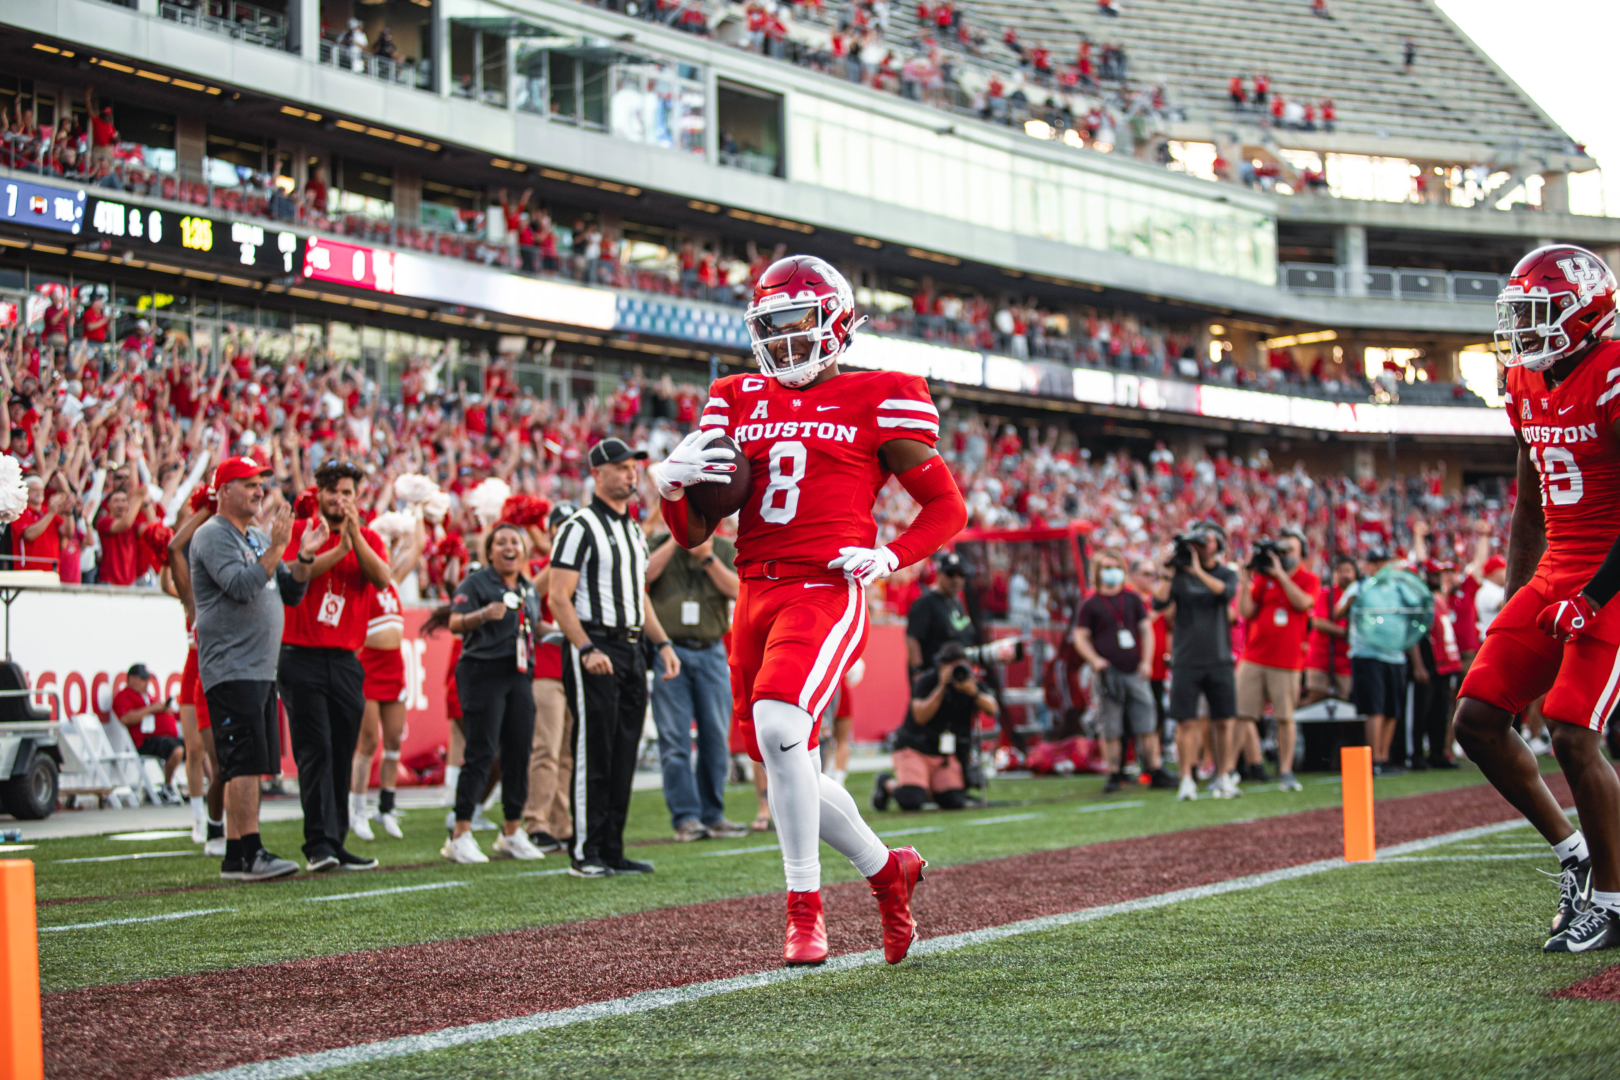 UH football Senior cornerback Marcus Jones was the only player in the nation to have multiple touchdowns from both punt and kickoff returns. | James Schillinger/The Cougar